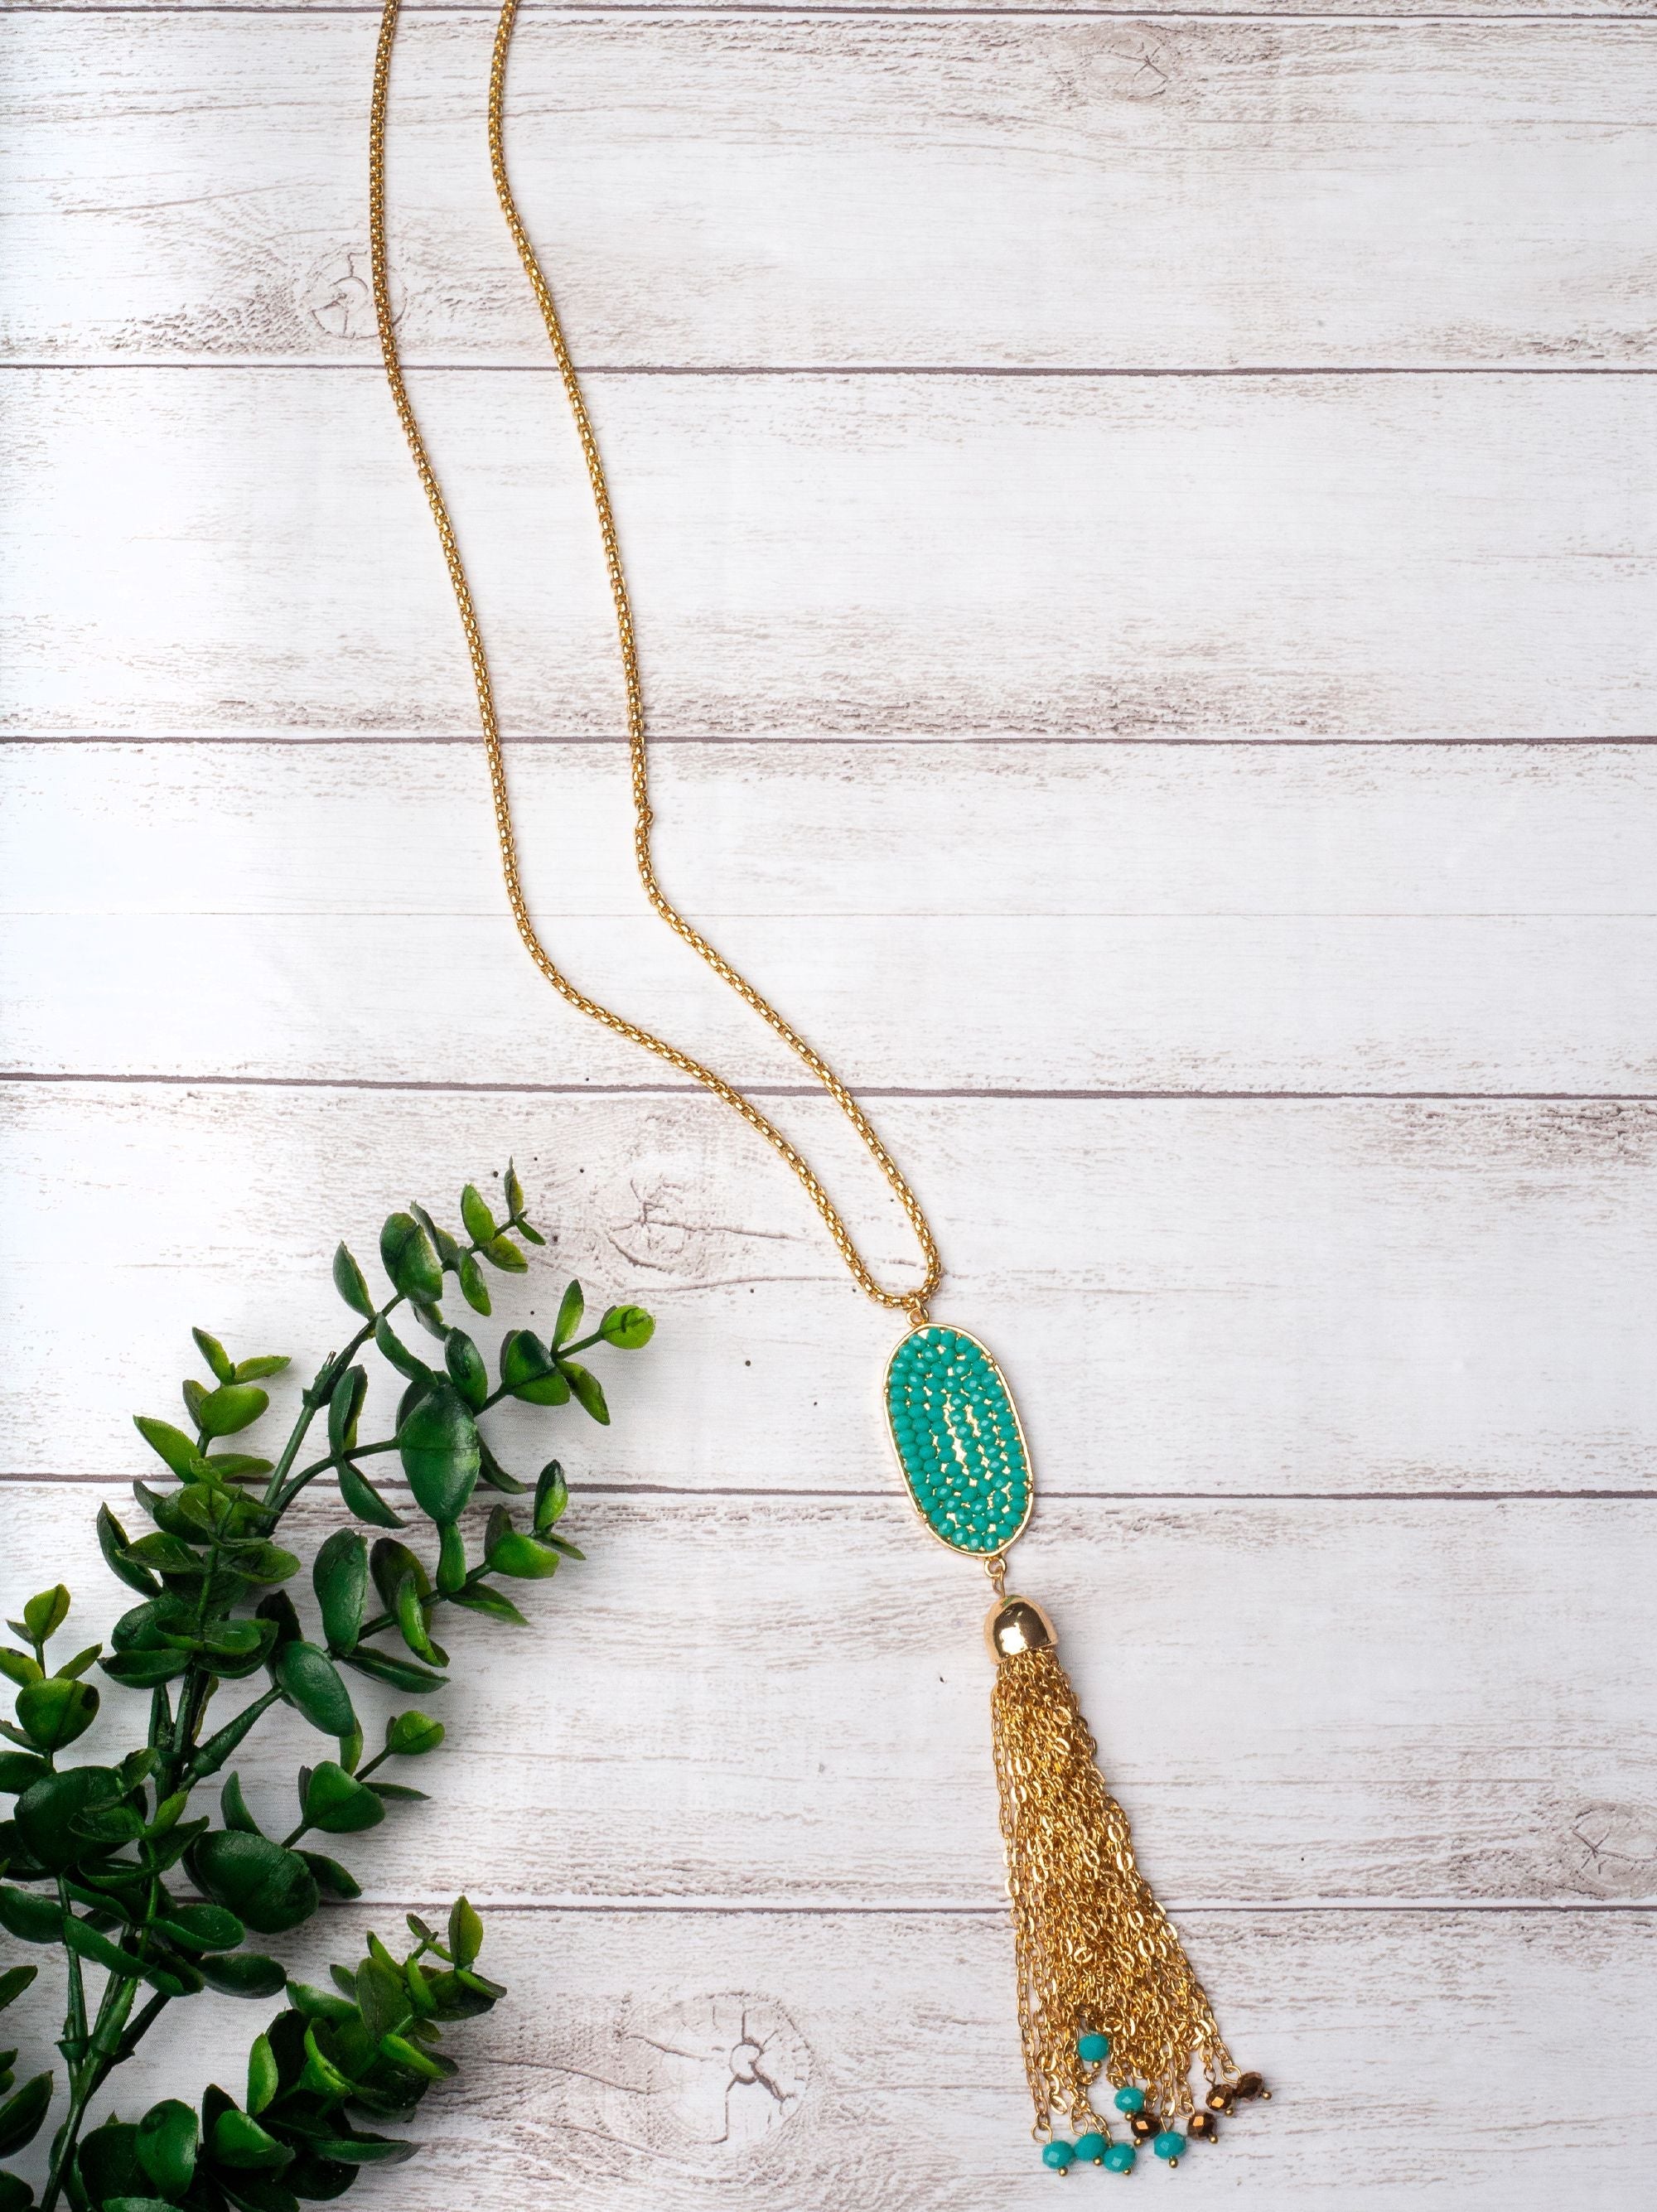 A LITTLE SPARKLE TURQUOISE CRYSTAL OVAL PENDANT TASSEL ON A GOLD NECKLACE